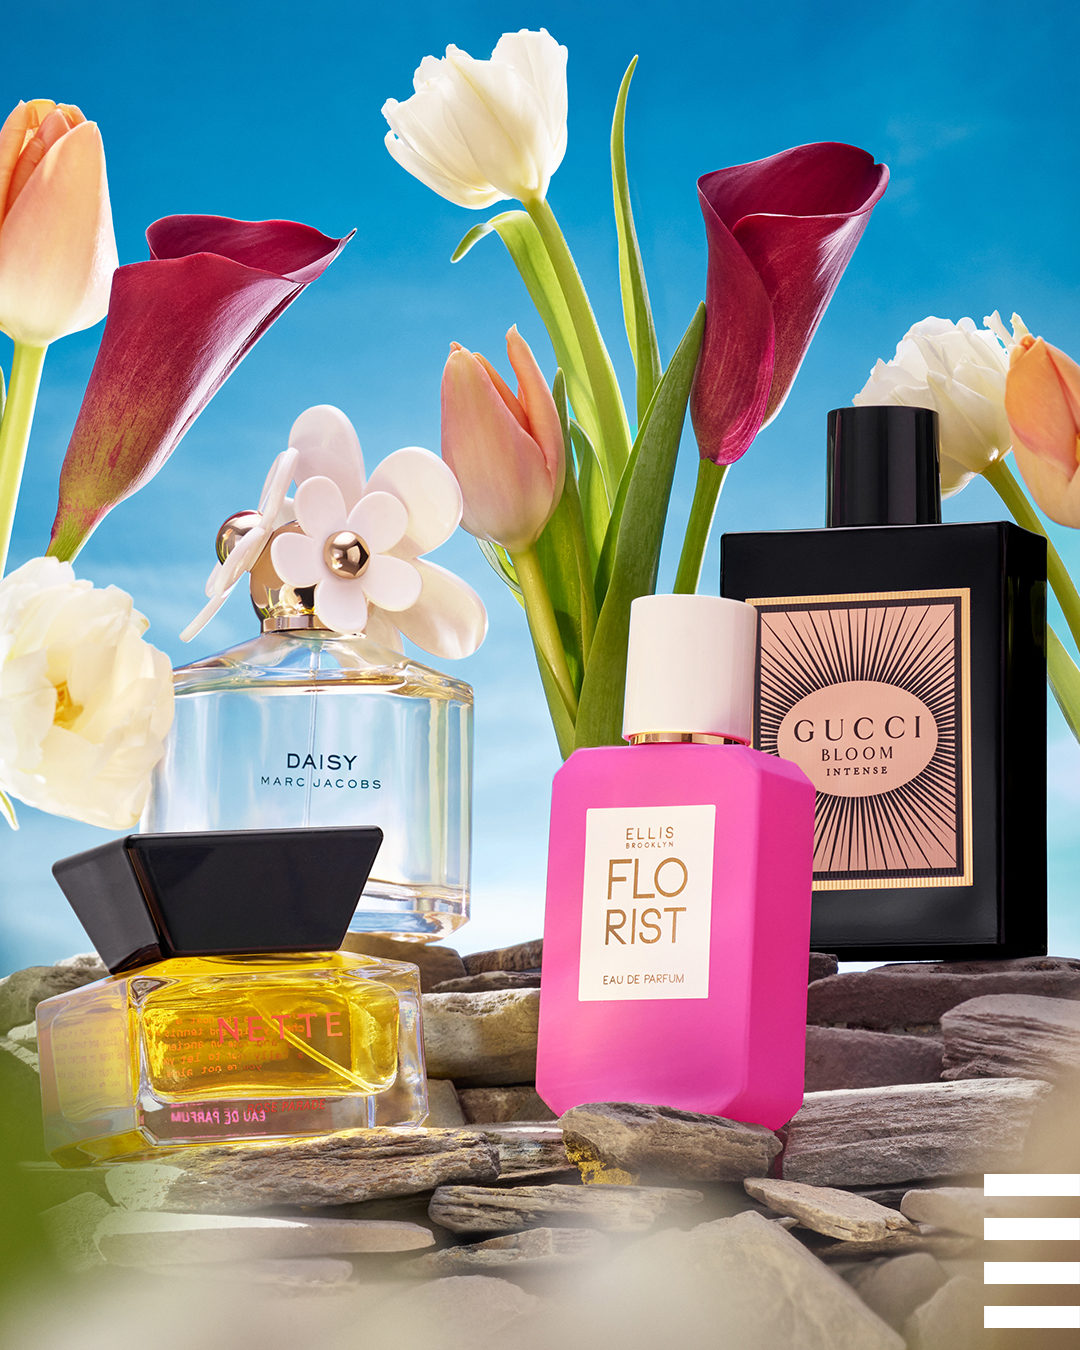 Four perfumes from Sephora are featured alongside beautiful spring flowers.